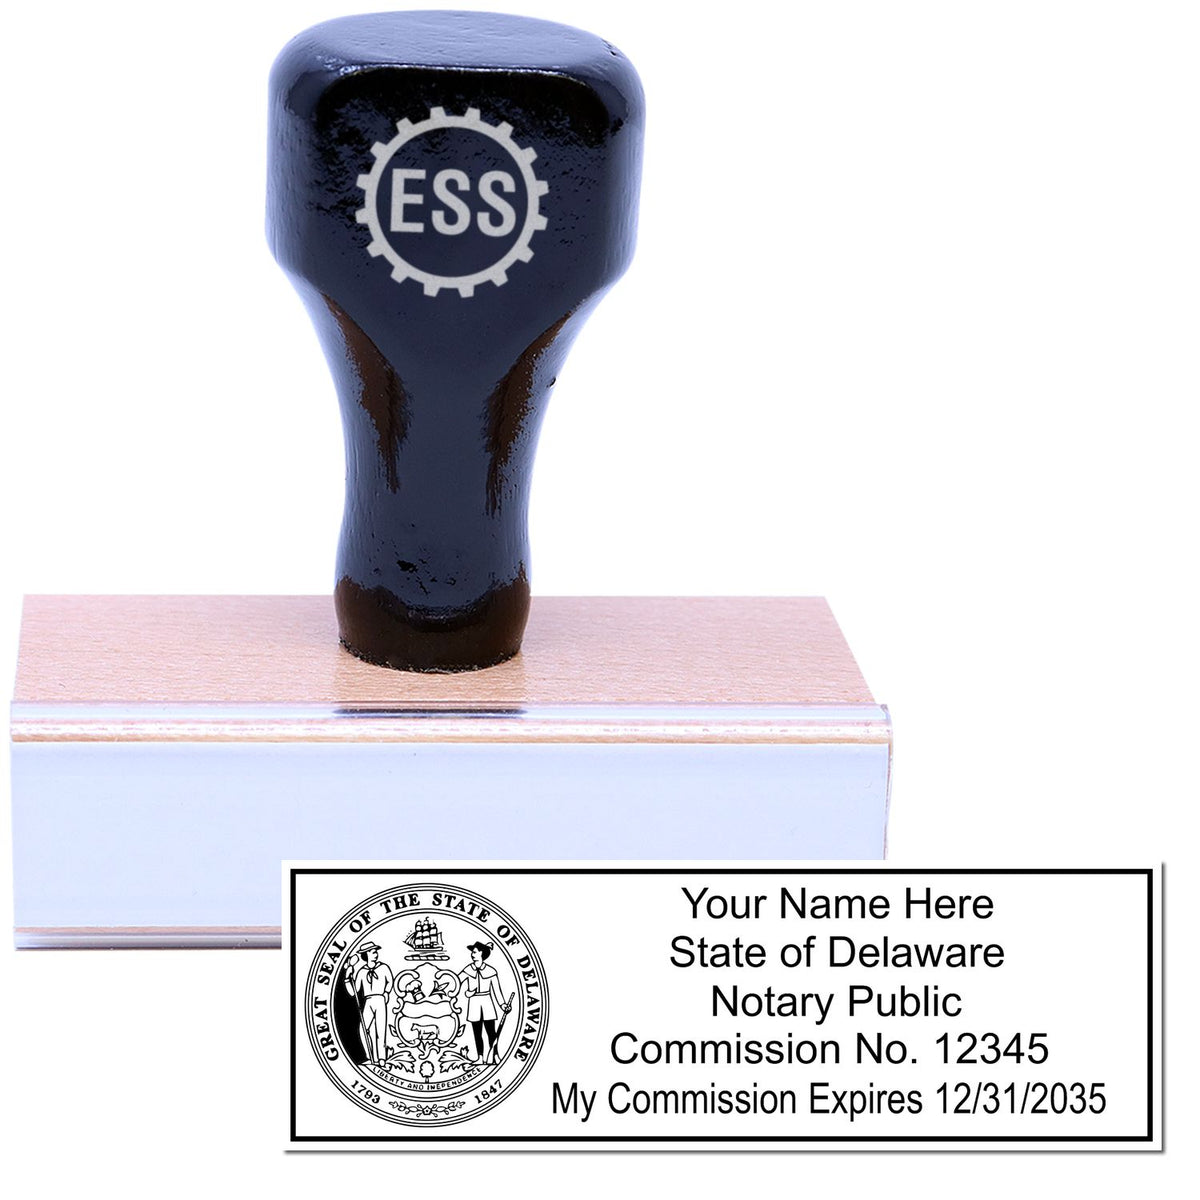 The main image for the Wooden Handle Delaware State Seal Notary Public Stamp depicting a sample of the imprint and electronic files